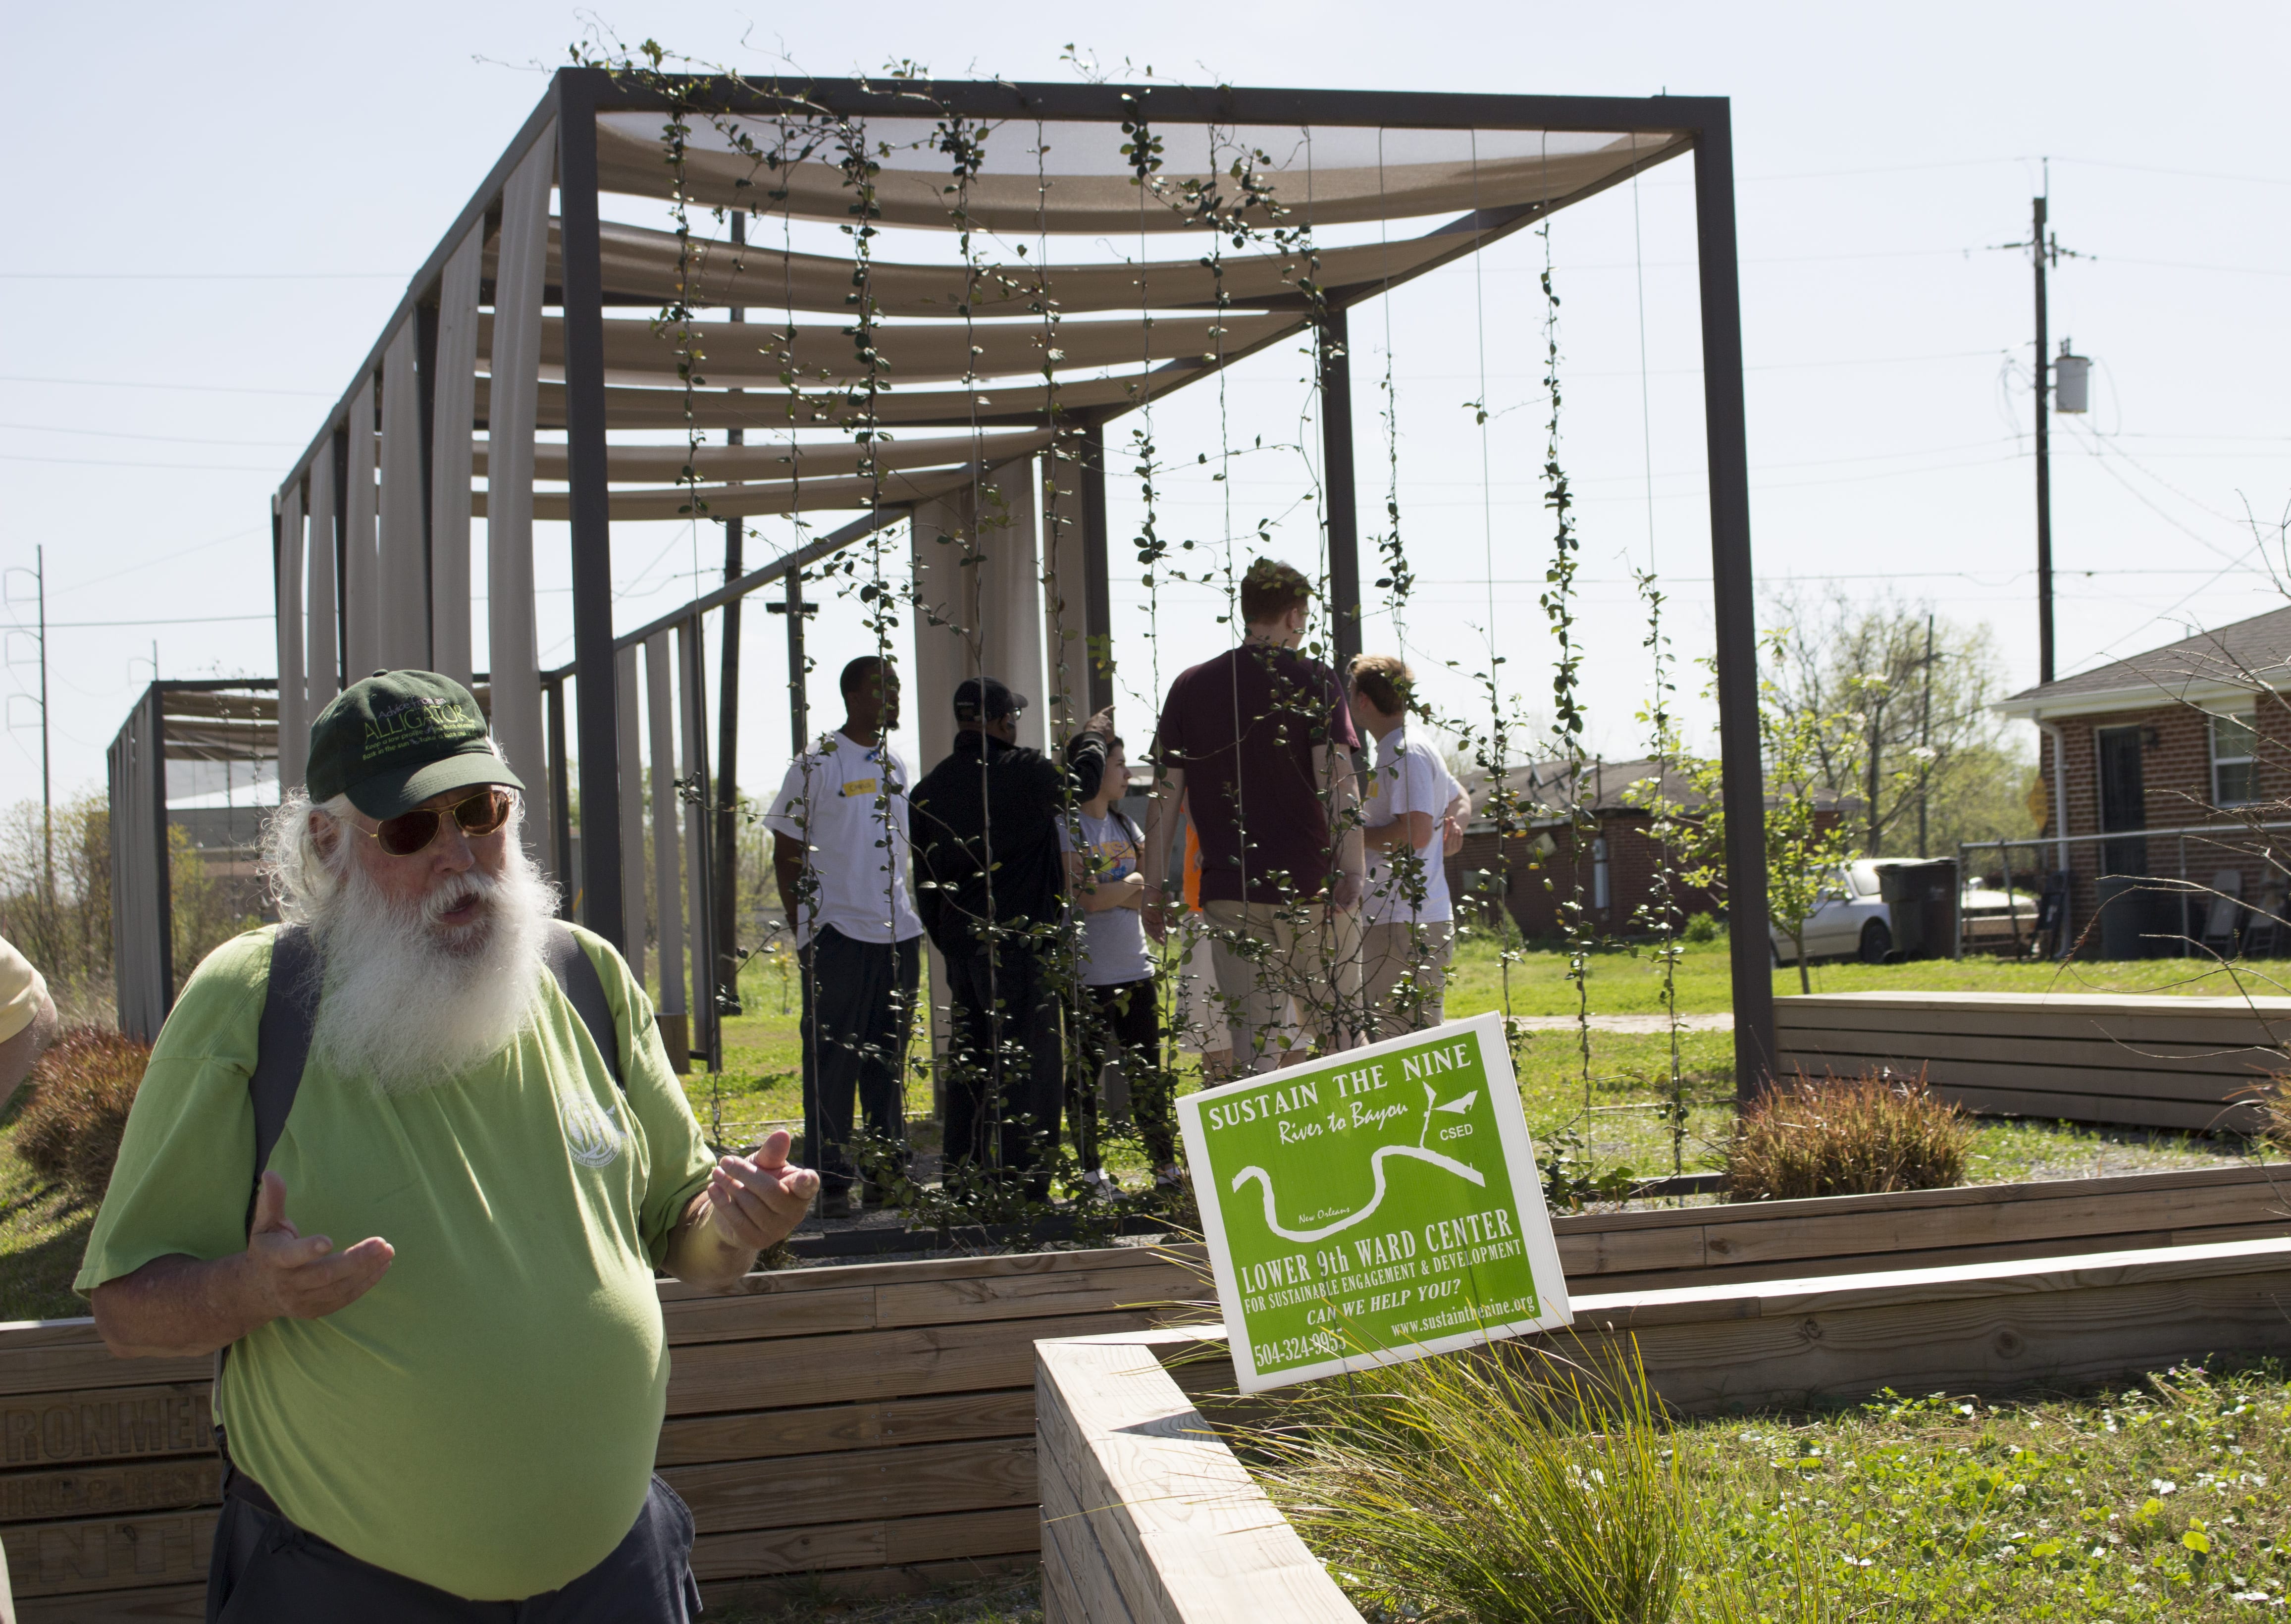 This outdoor classroom is located across the street from Bayou Bienvenue and it provides a space for volunteers and community members alike to learn about the ways in which the Lower Ninth Ward is rebuilding.